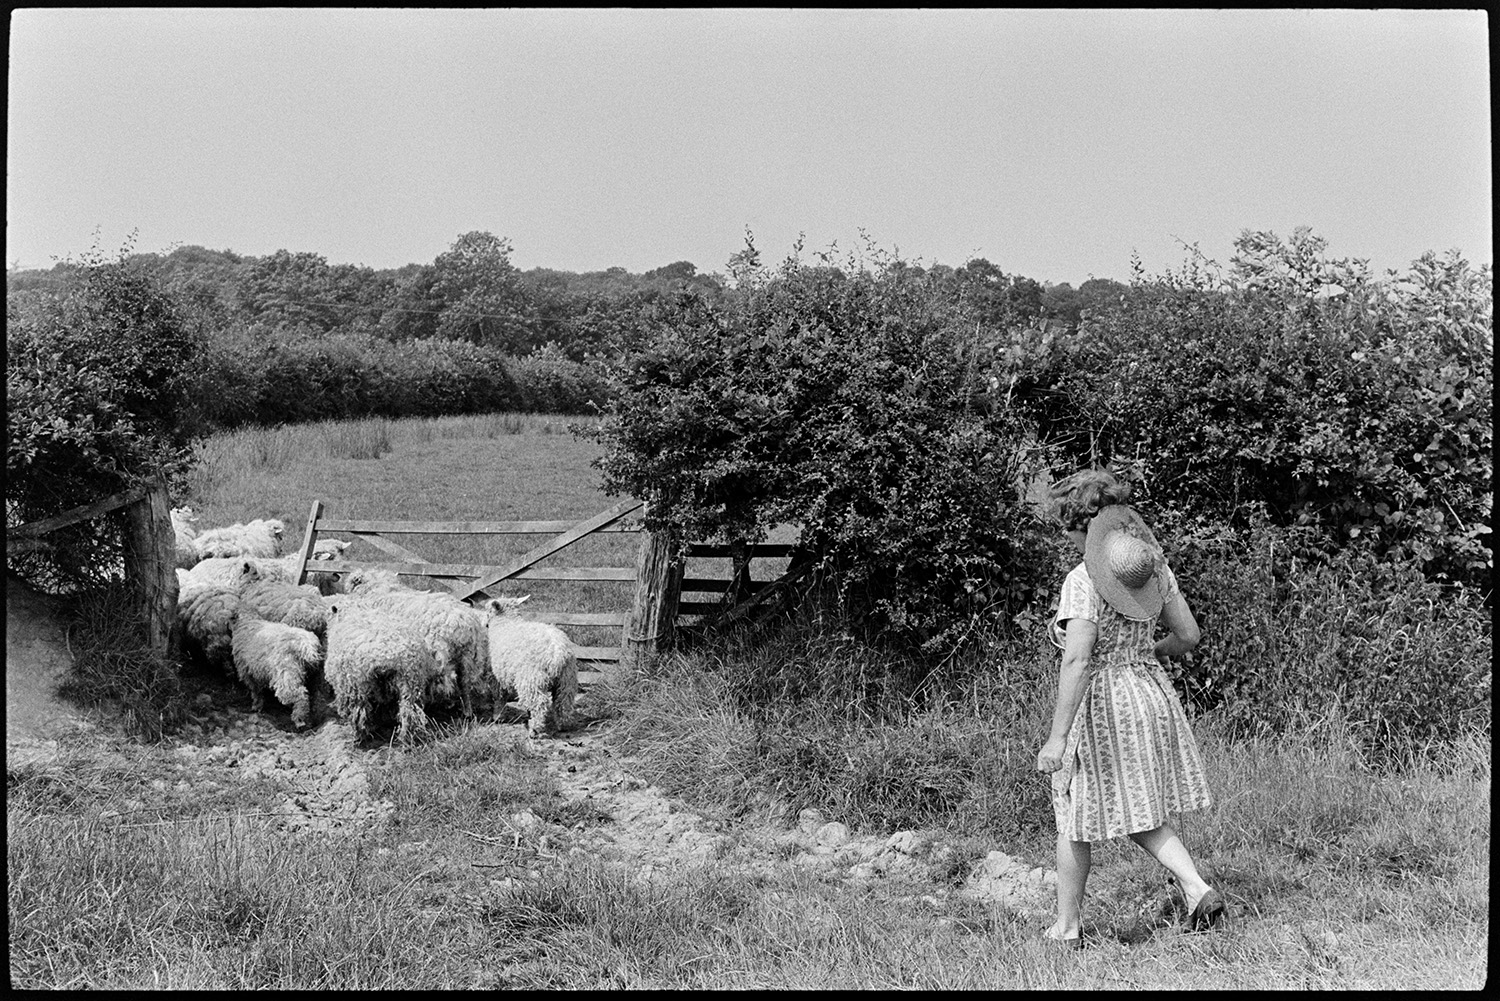 Woman checking sheep. 
[Mrs Oke herding a small flock of sheep through a field gate at Deckport, Hatherleigh. She is wearing a dress and a straw hat.]